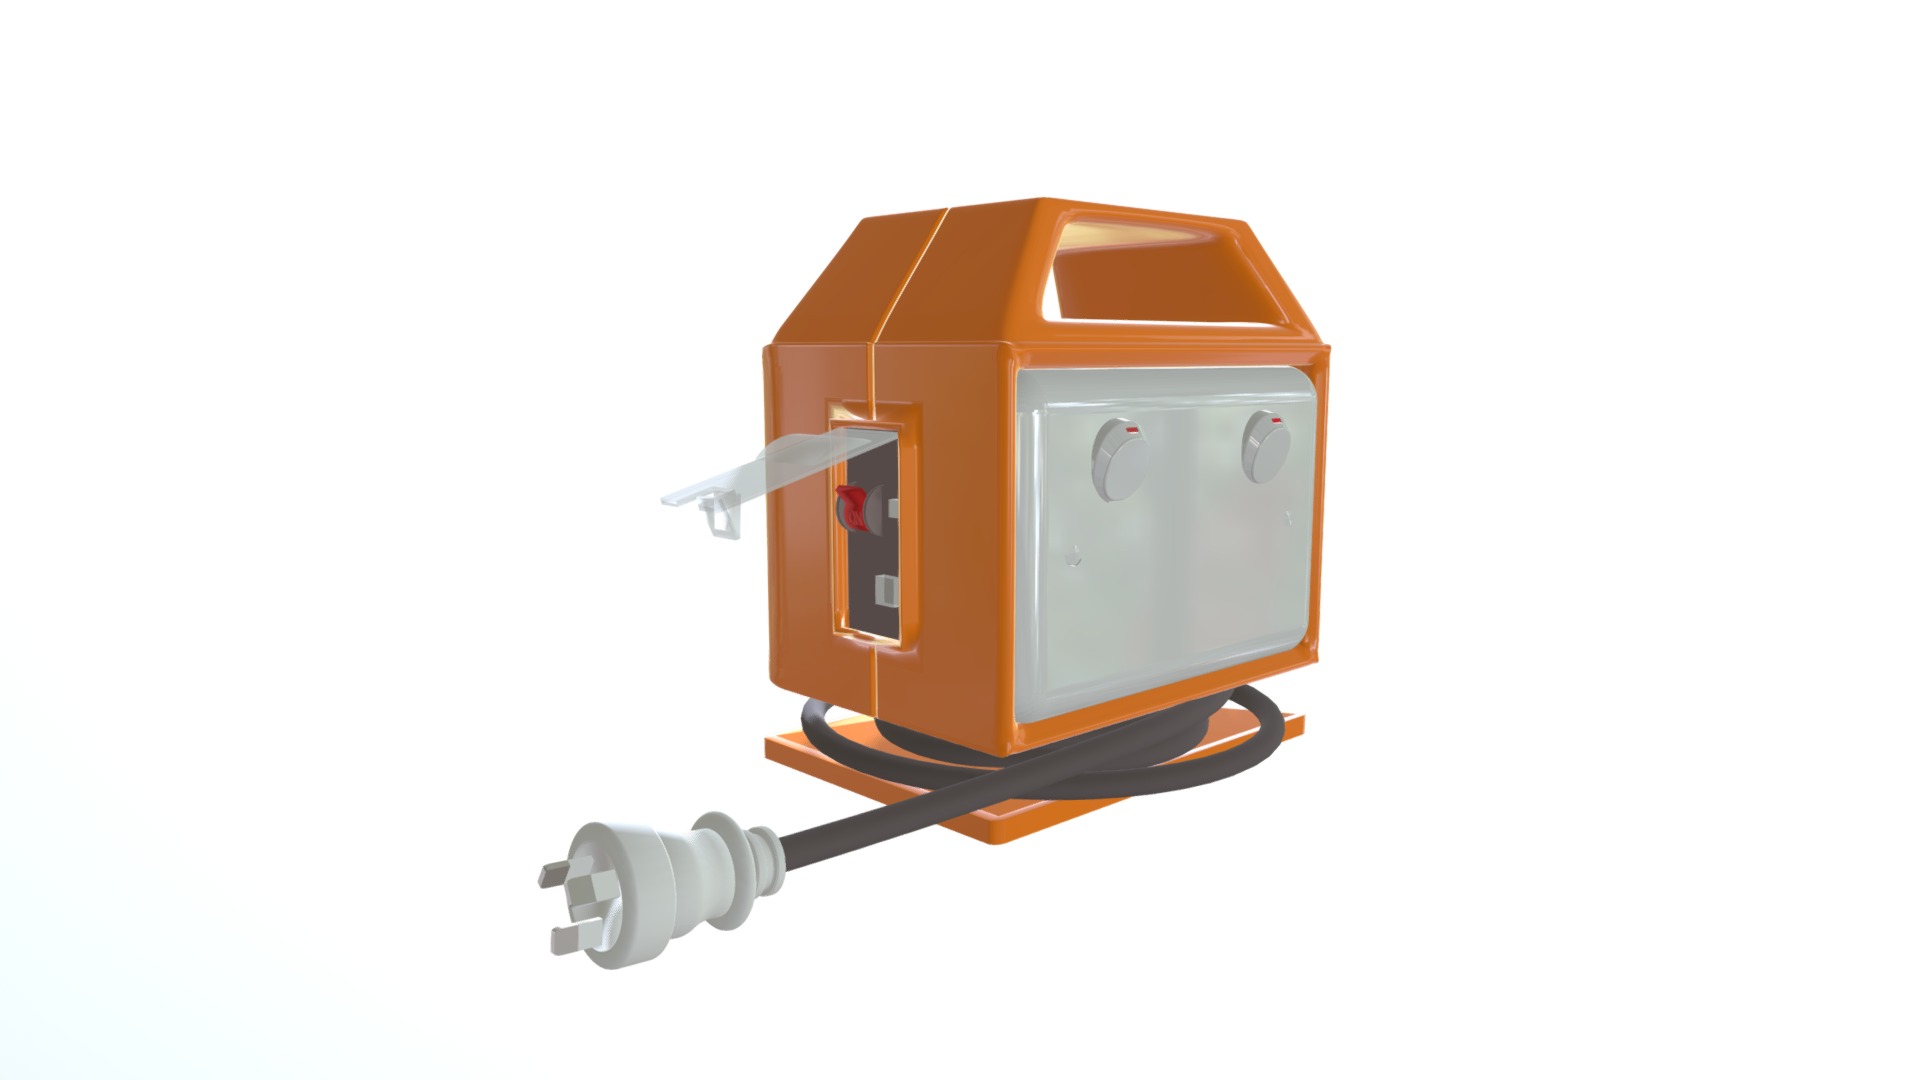 3D model Electrical Safety Box - This is a 3D model of the Electrical Safety Box. The 3D model is about a small orange and white robot.